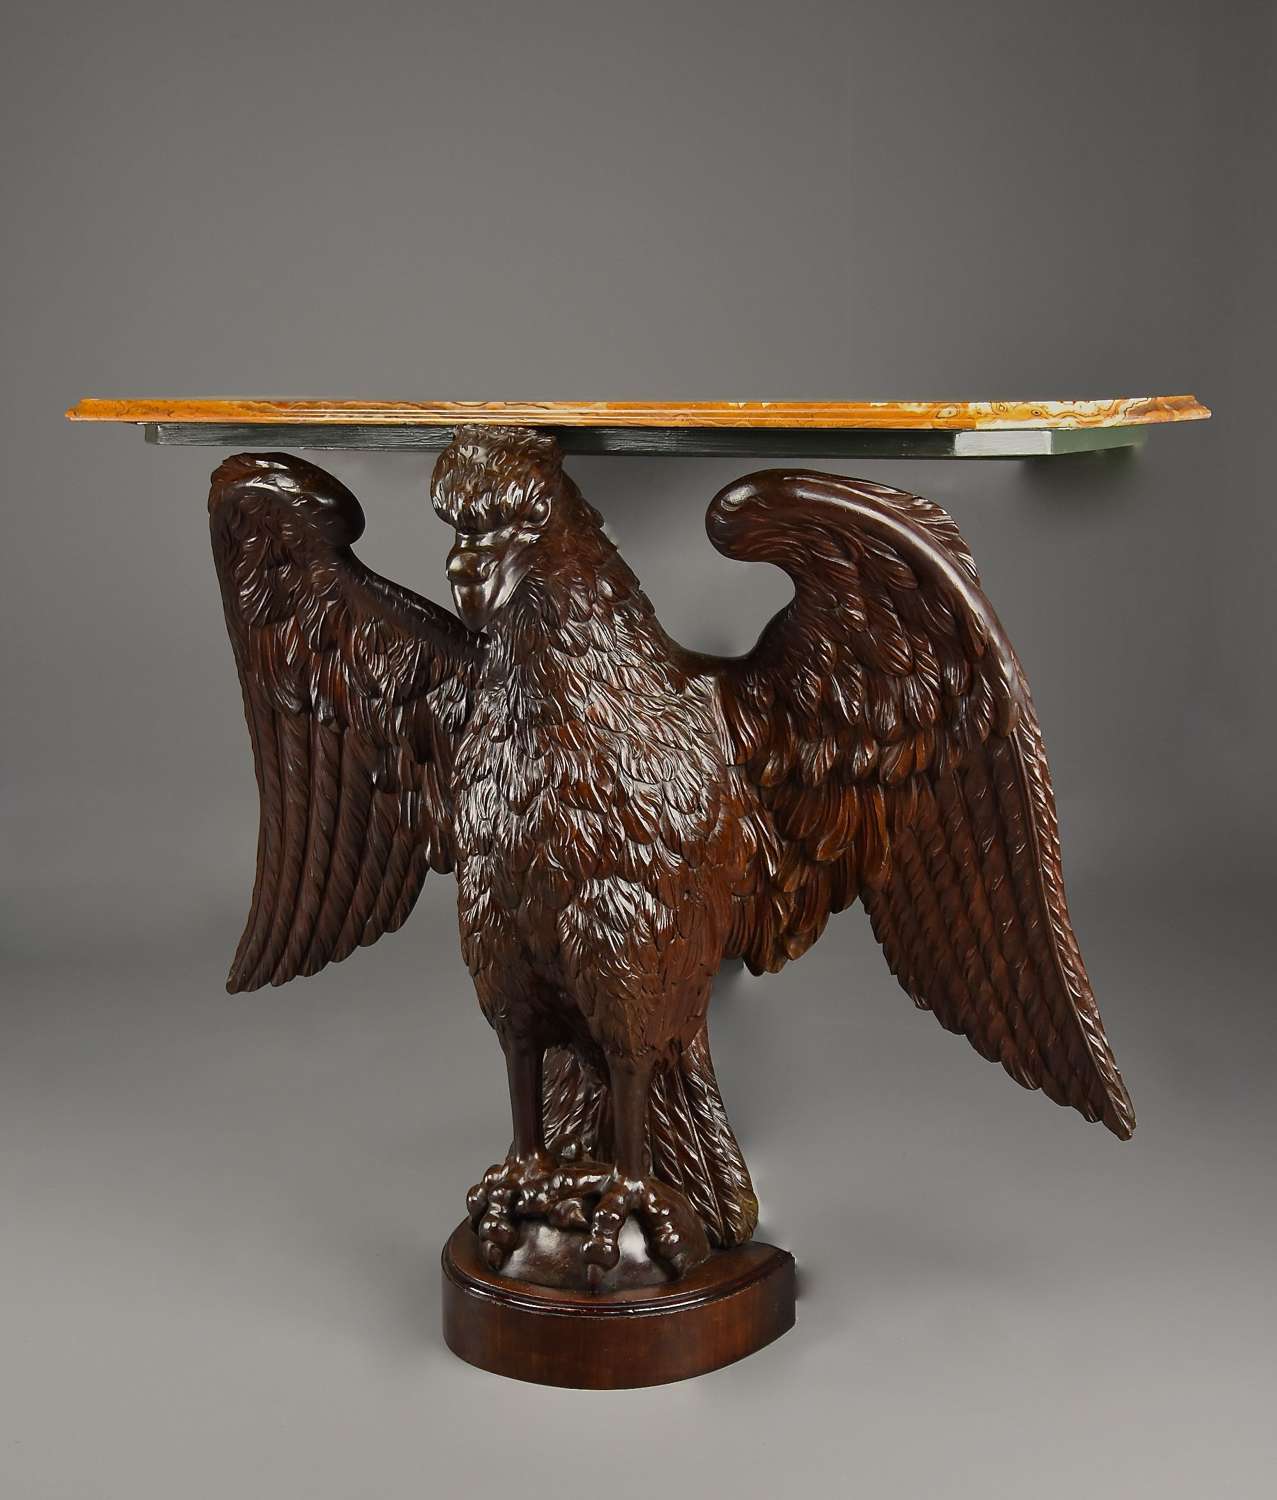 Exceptional late 18thc large Baroque style carved walnut eagle table